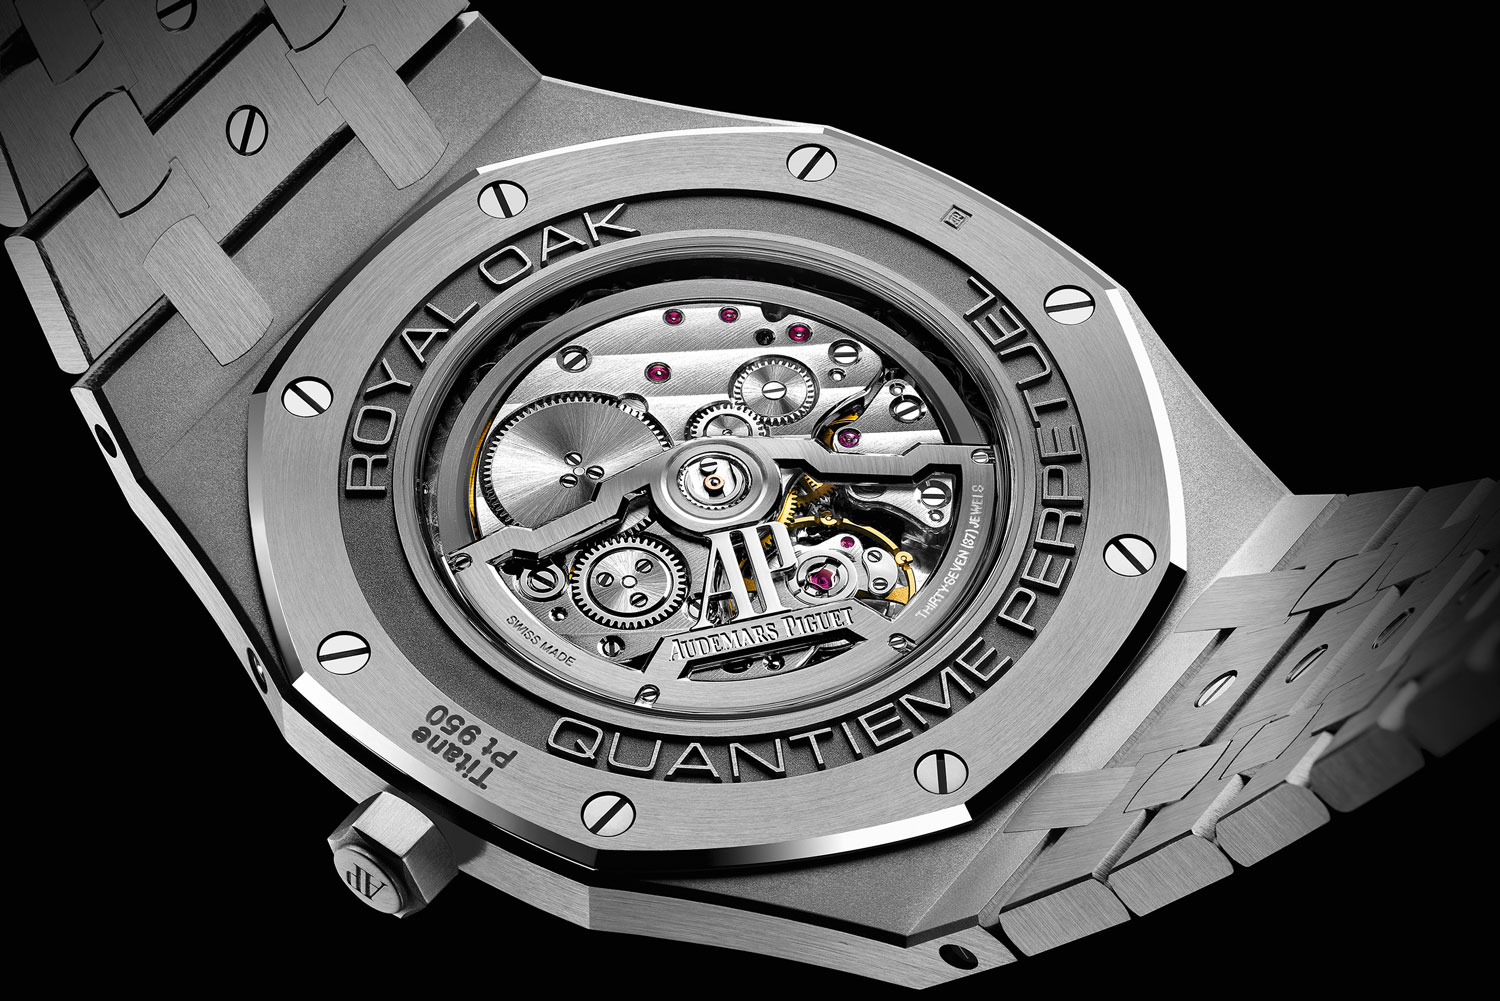 Caseback of the Royal Oak Perpetual Calendar Ultra-Thin showing off the ultra-thin 5513